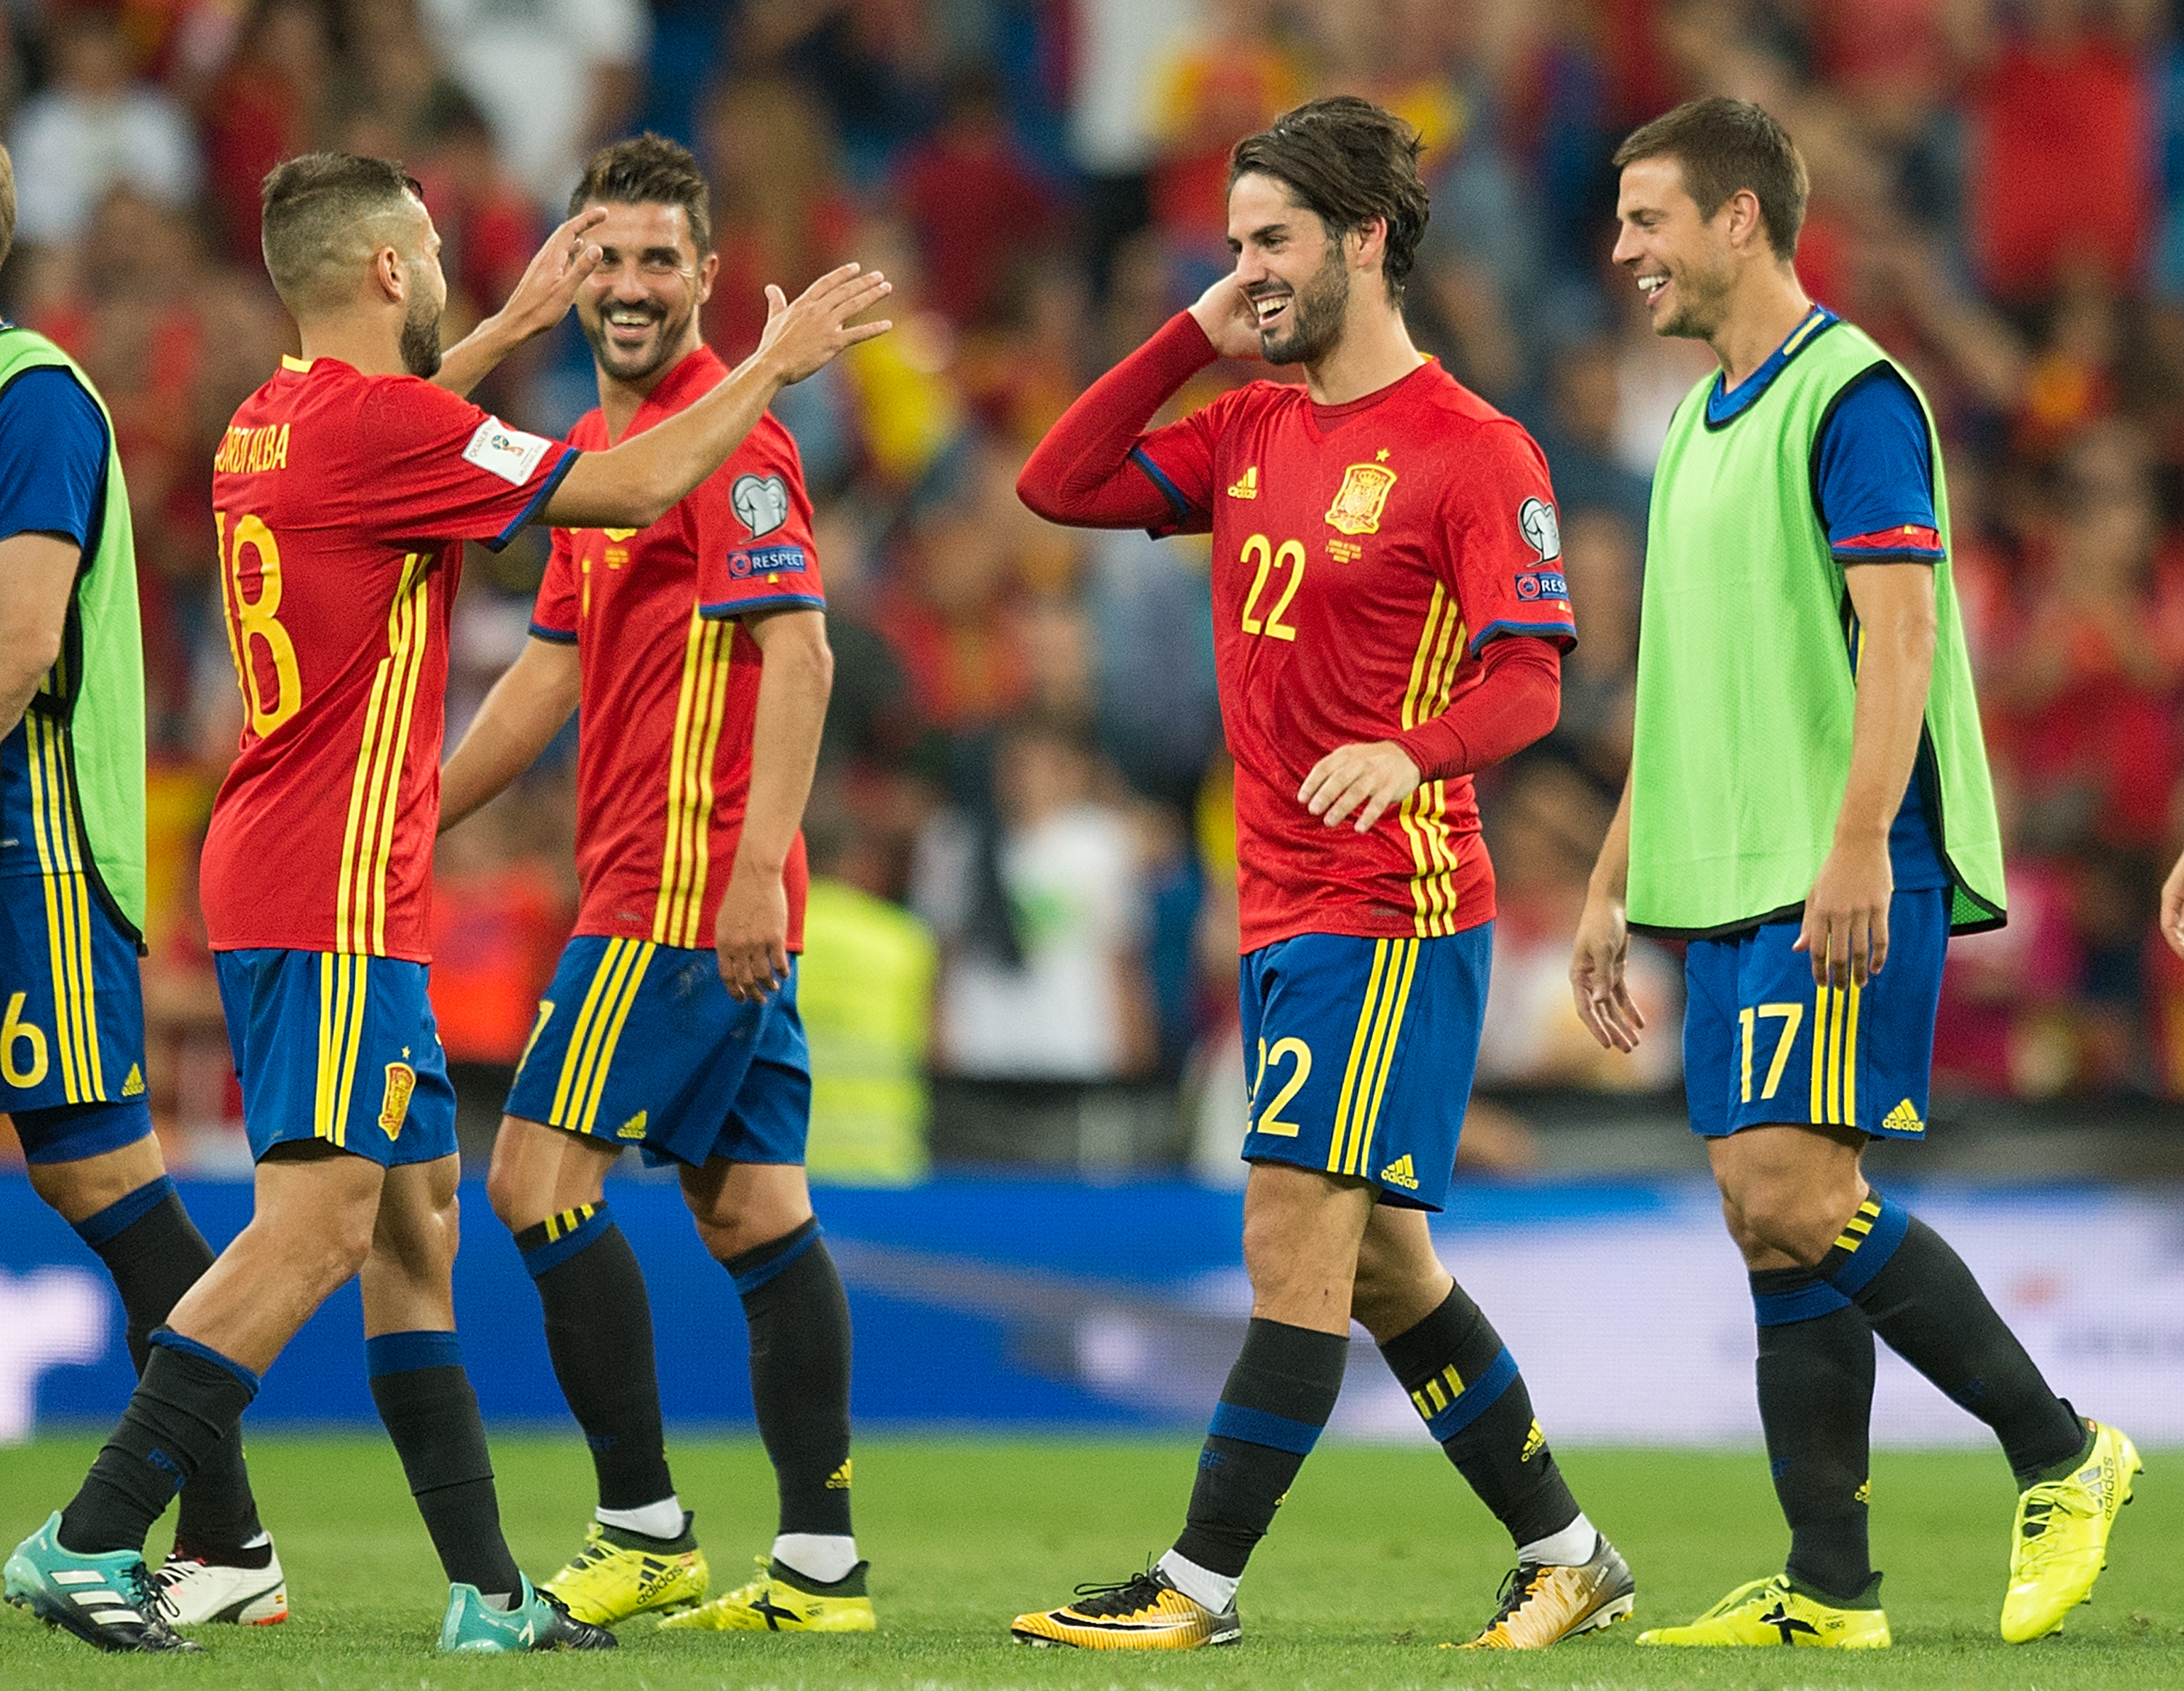 MADRID, SPAIN - SEPTEMBER 02: Isco Alarcon of Spain (#22) celebrates with Jordi Alba after Spain beat Italy 3-0 during the FIFA 2018 World Cup Qualifier between Spain and Italy at Estadio Santiago Bernabeu on September 2, 2017 in Madrid, Spain. (Photo by Denis Doyle/Getty Images)